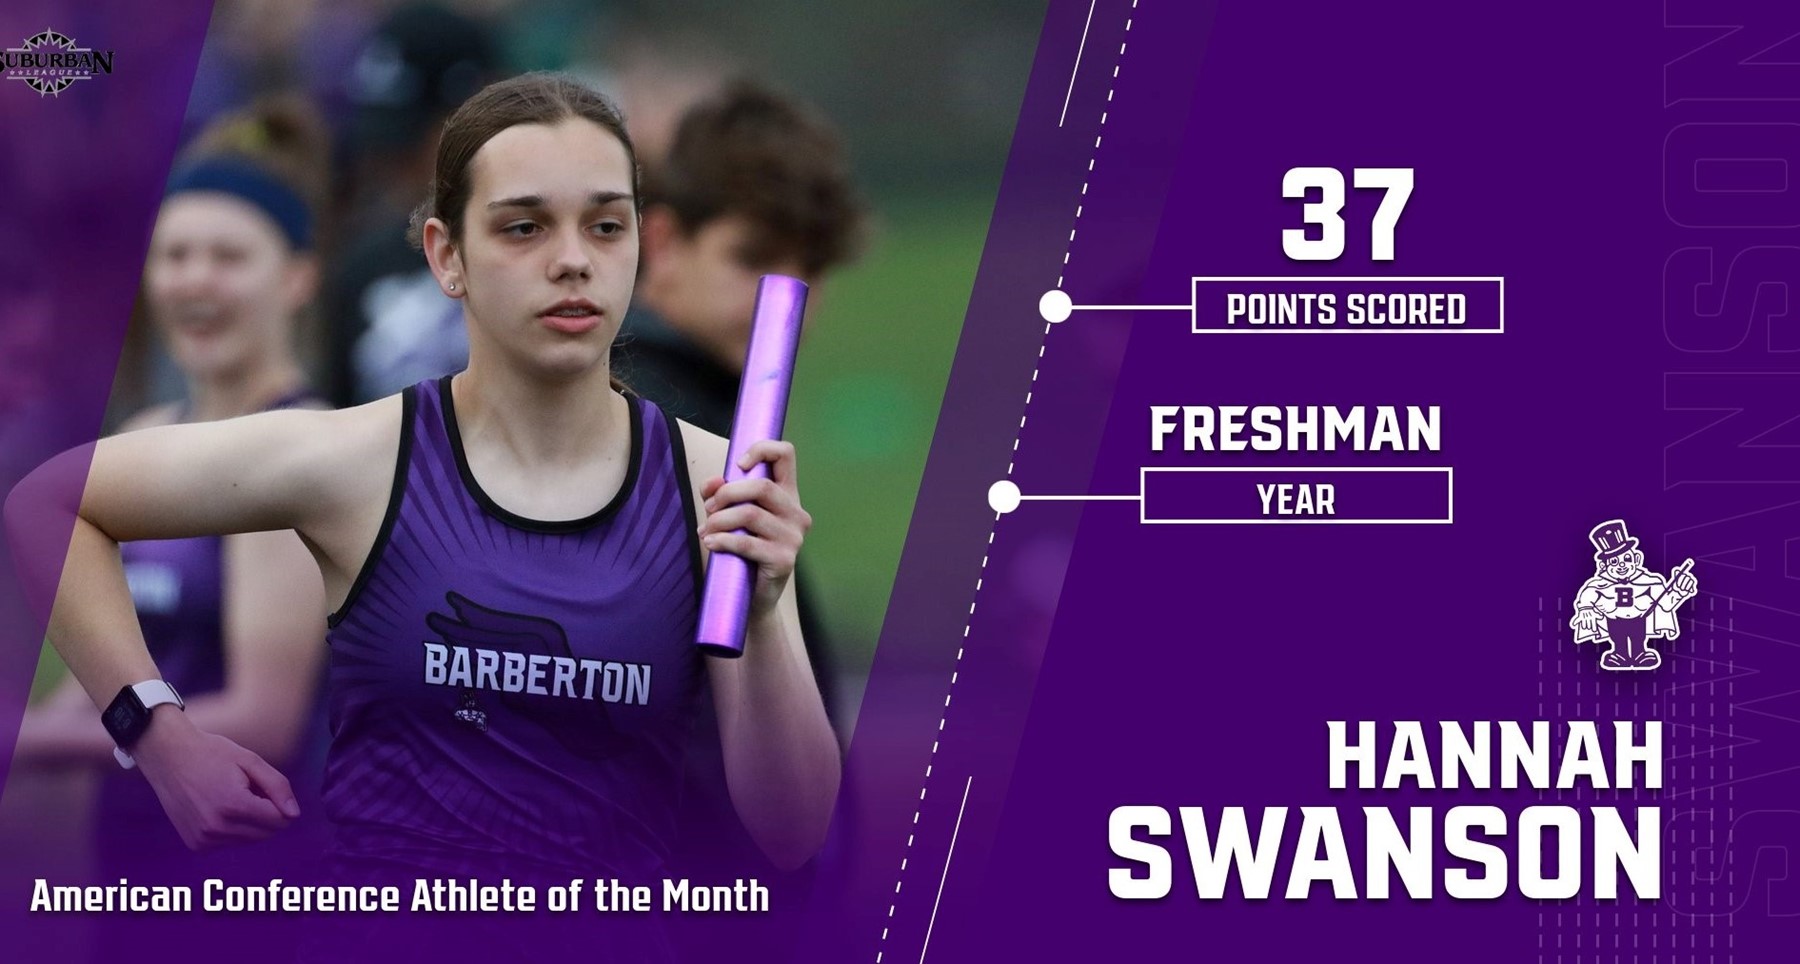 Congrats to BHS Freshman runner Hannah Swanson for being named the American Conference Athlete of the Month!